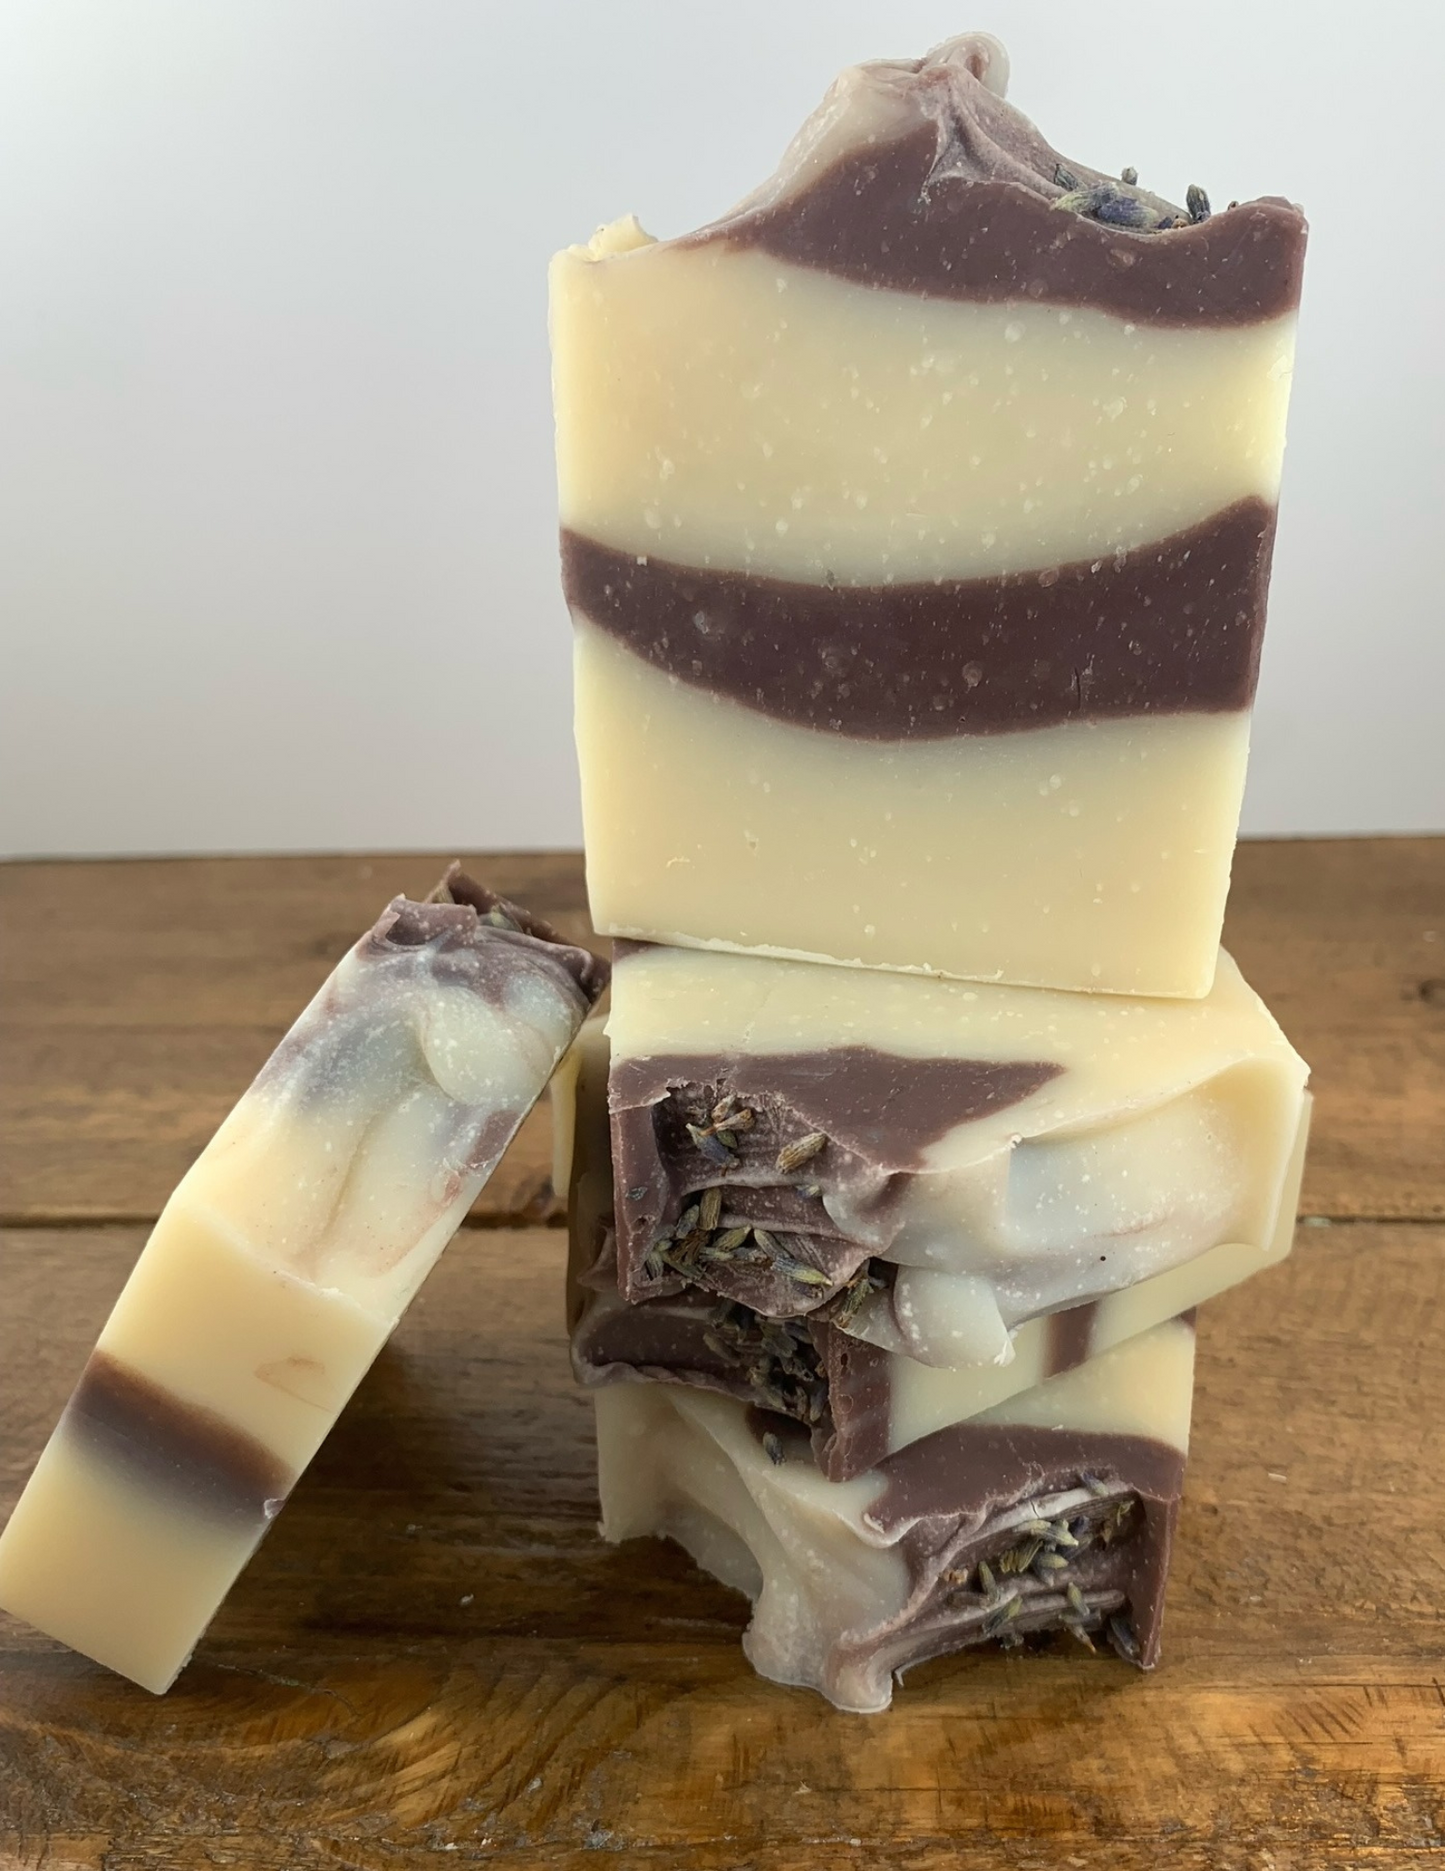 Stack of Lavender Soaps on a wooden table with a white background. Another bar of soap leans against the stack. The soap is a creamy color with a purple swirl from the Brazillian Purple Clay.